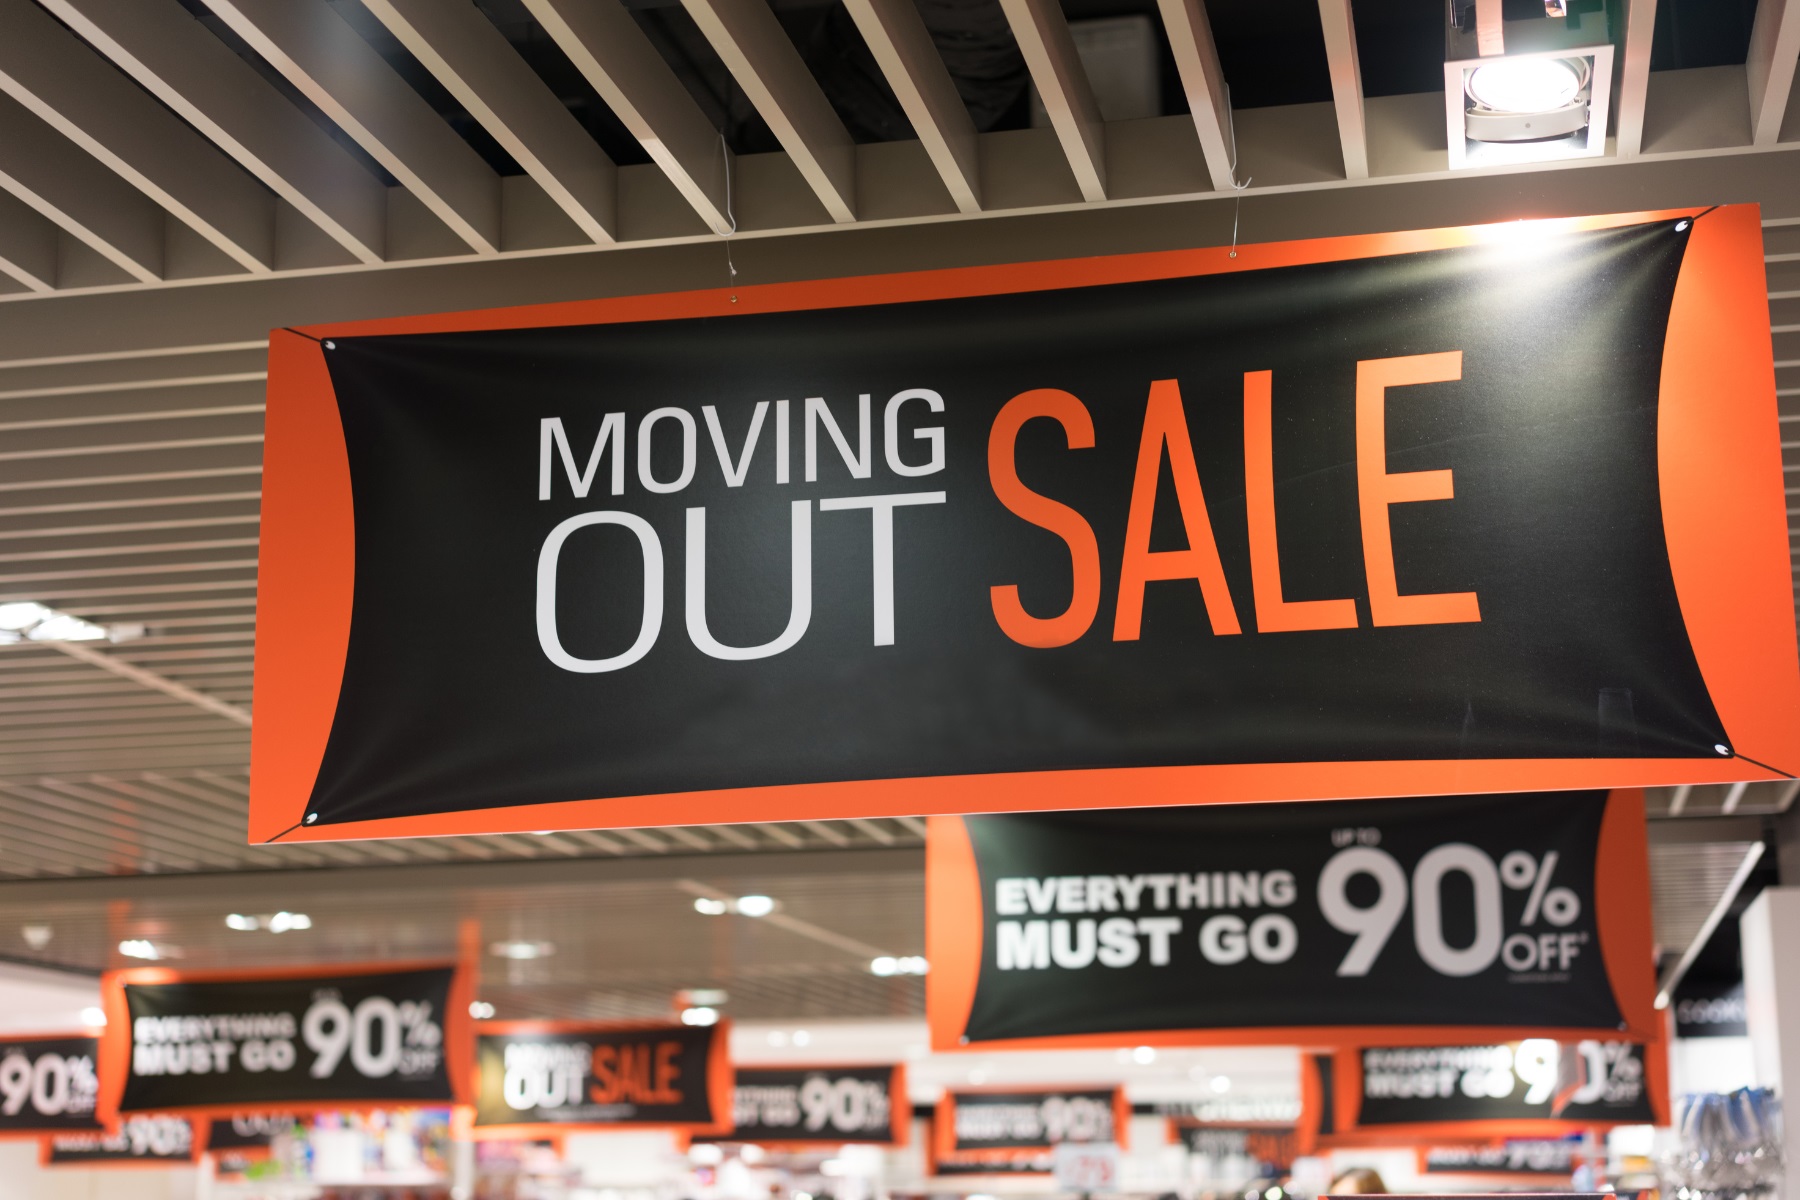 Photo of a banner hanging in a retail store. The banner has 'Moving out sale" printed on it.